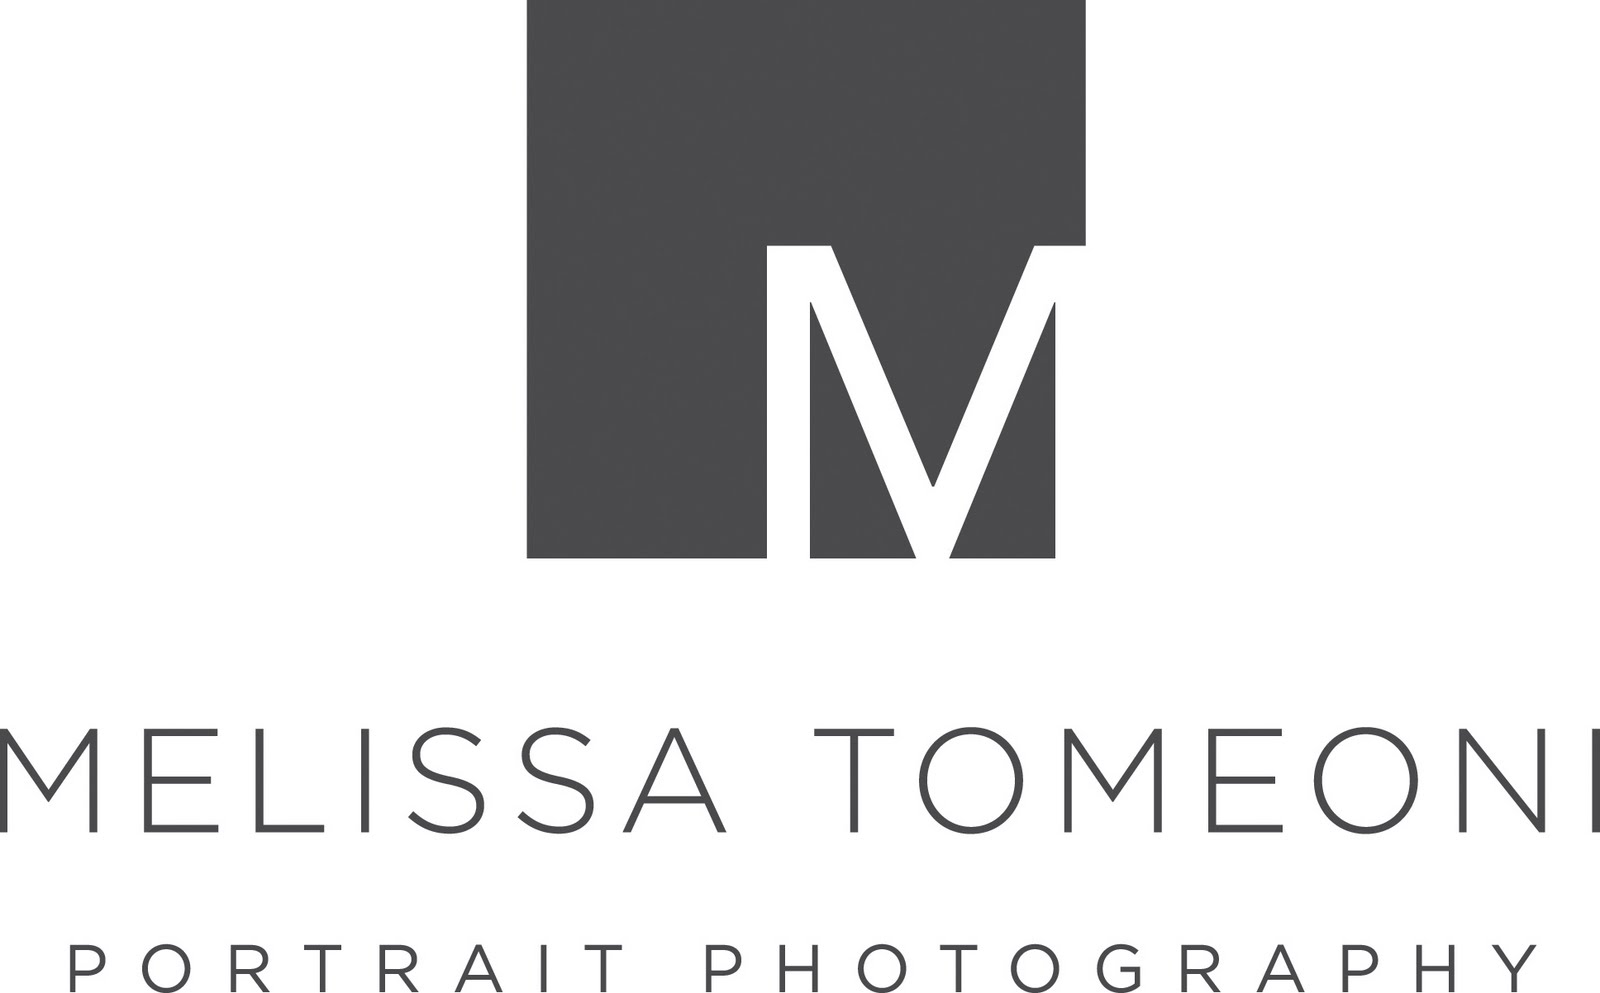 studiom is now clark and company.: Melissa Tomeoni. A new identity ...